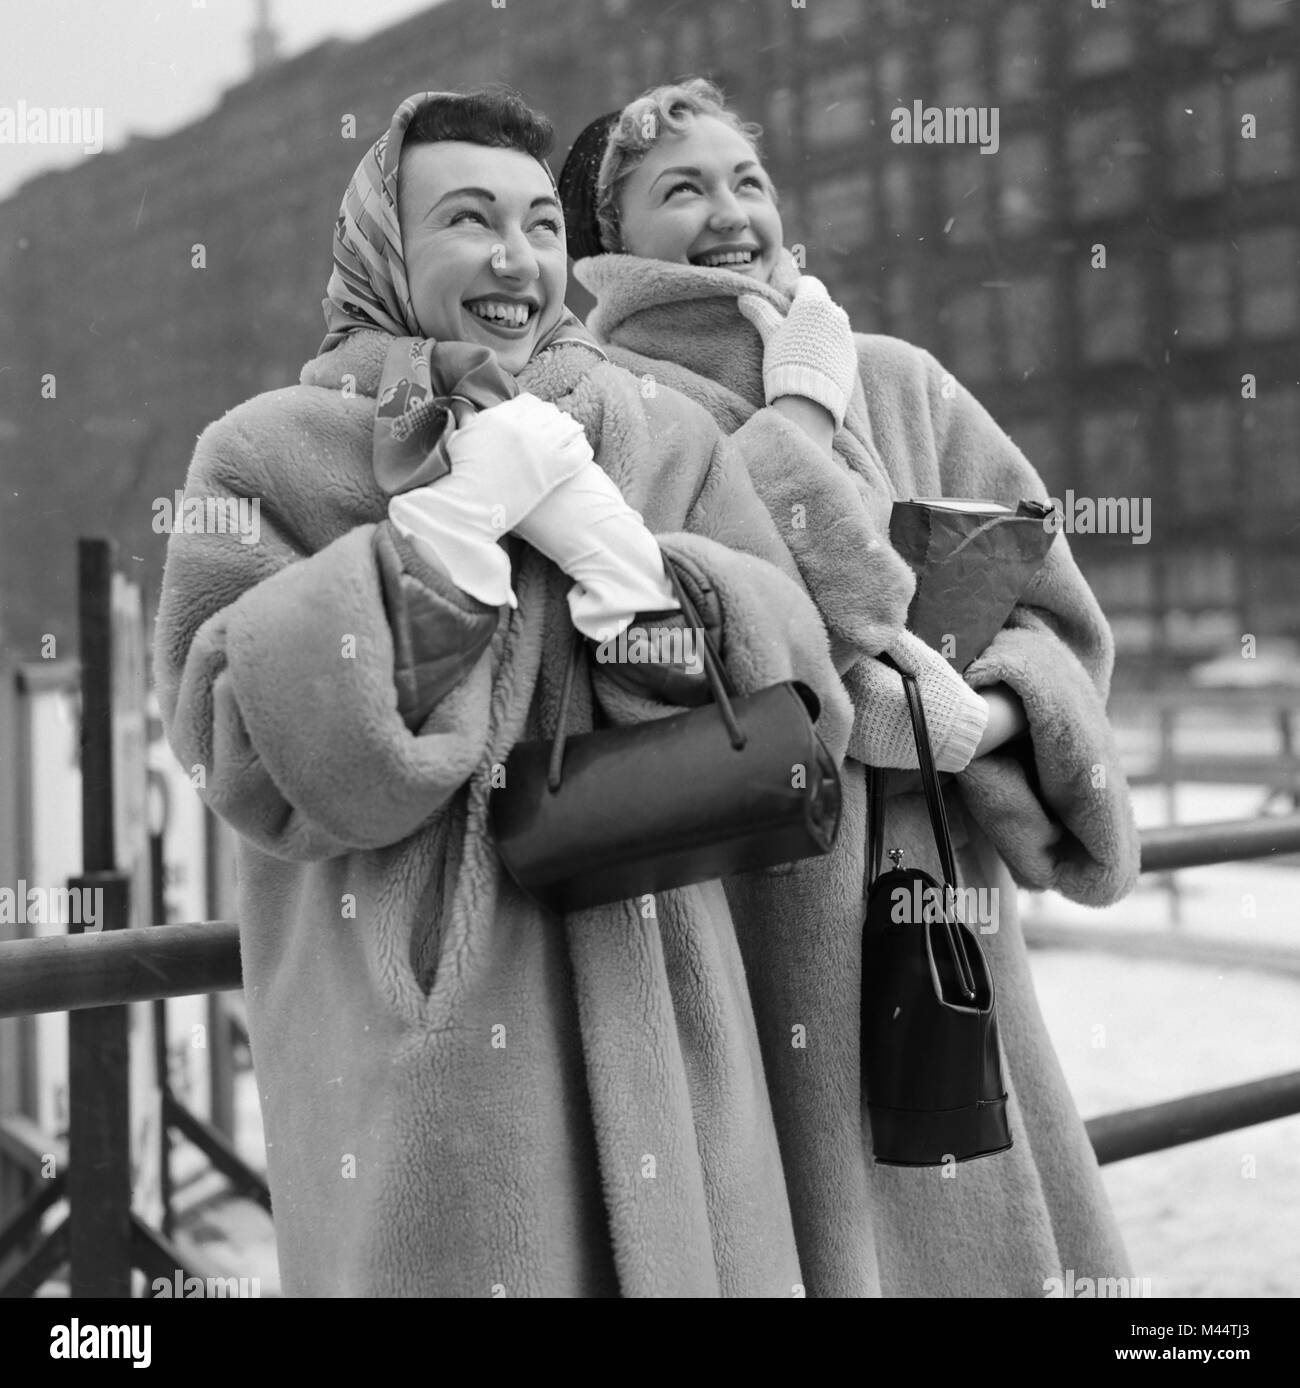 Two fashionable young women bundle up against the cold Chicago winter weather, ca. 1956. Stock Photo